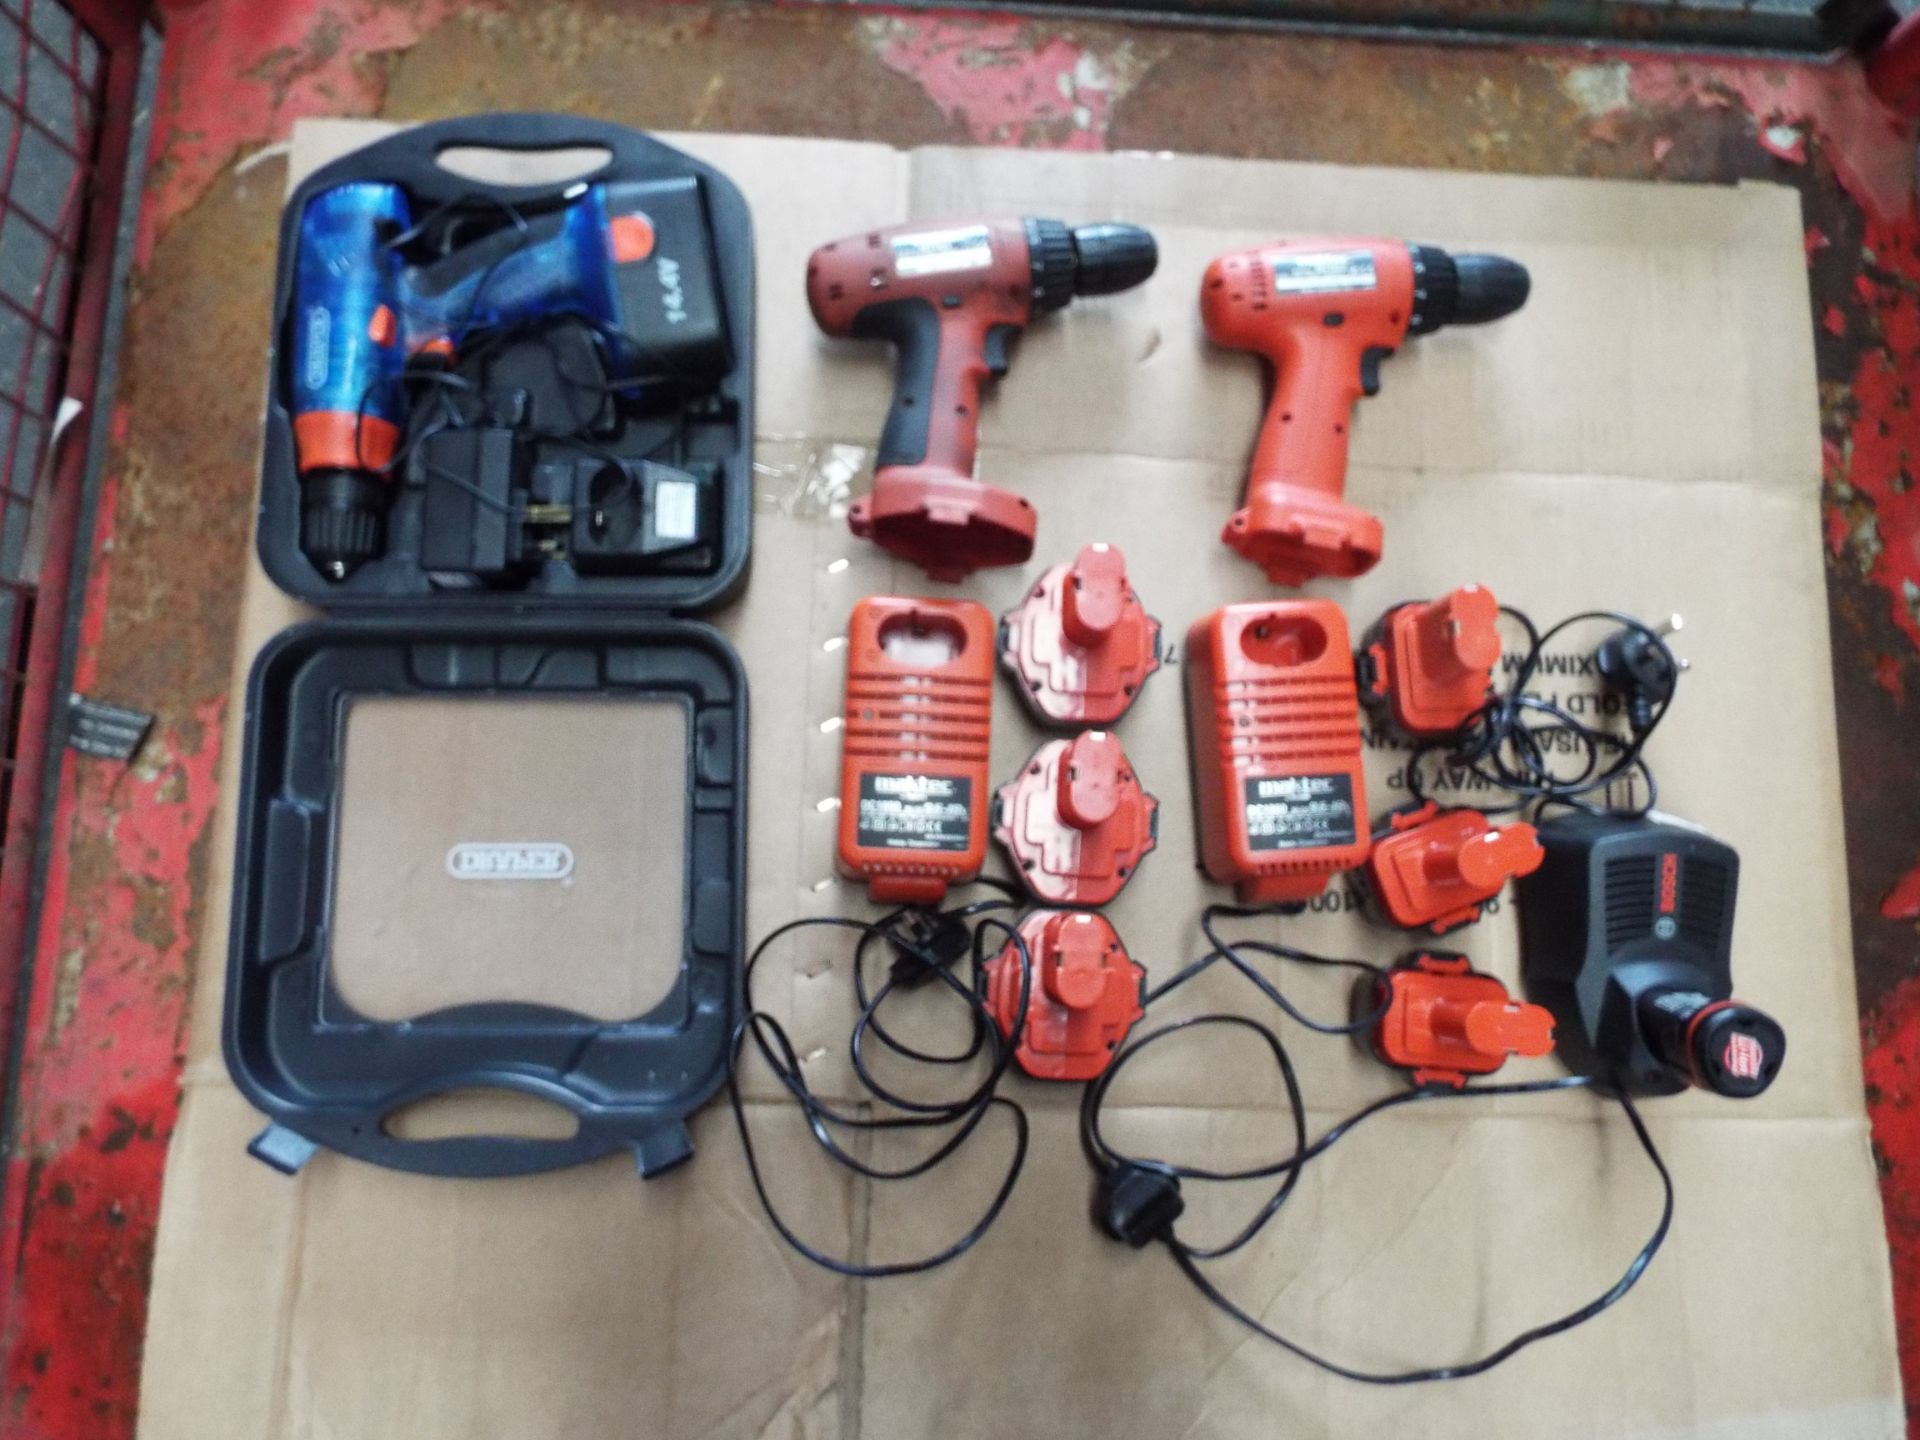 Mixed Stillage of Power Tools consisting of Drills, Batteries and Chargers